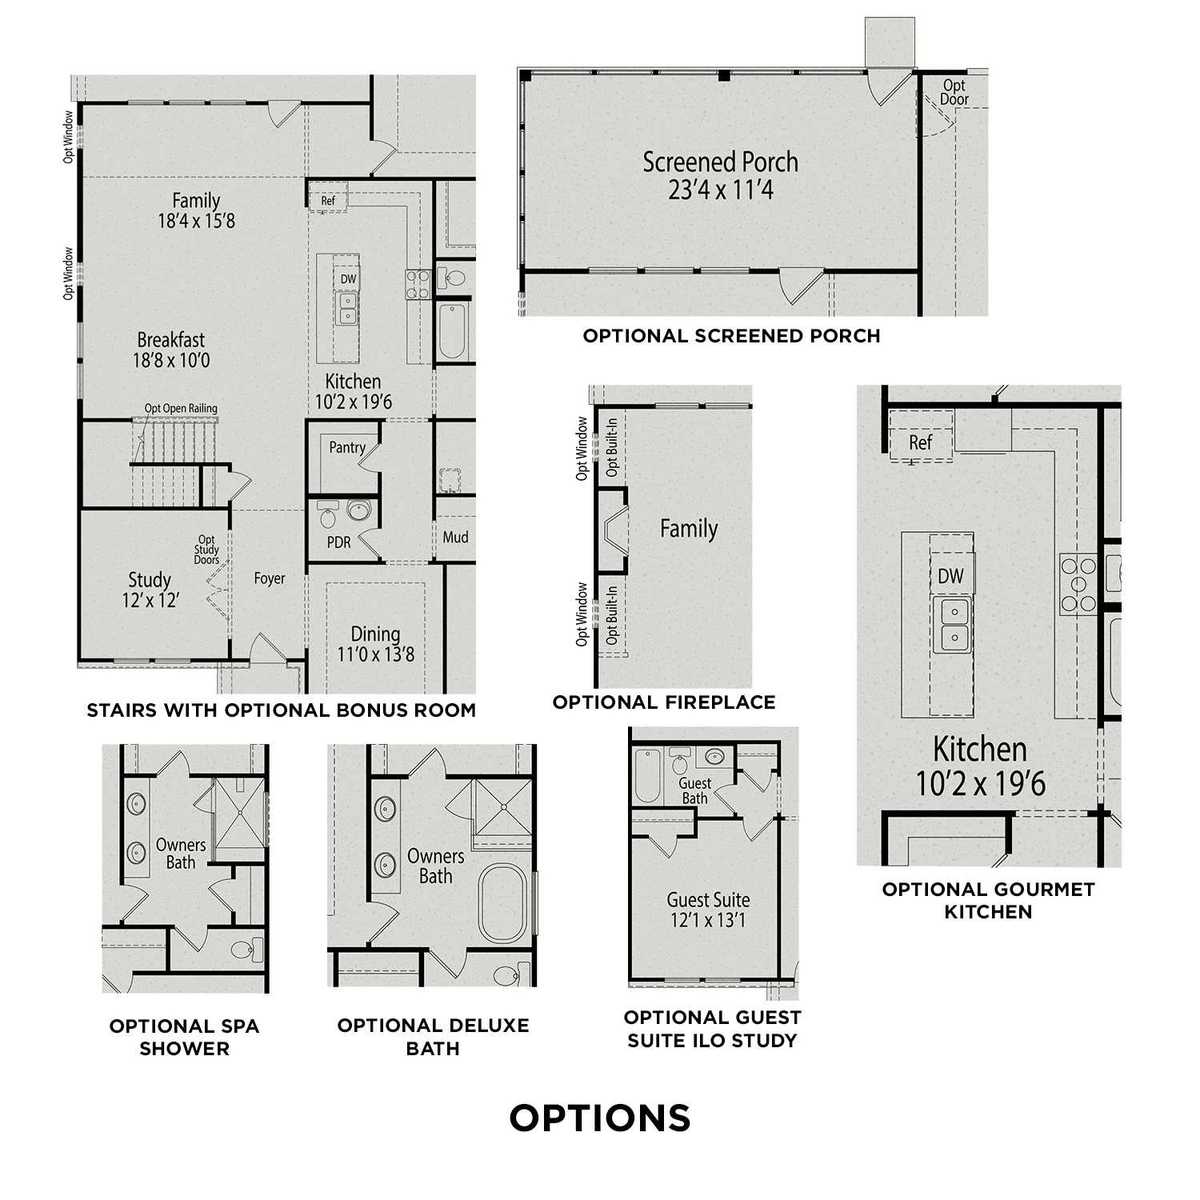 3 - The Magnolia B floor plan layout for 179 Castle Pond Way in Davidson Homes' Prince Place community.